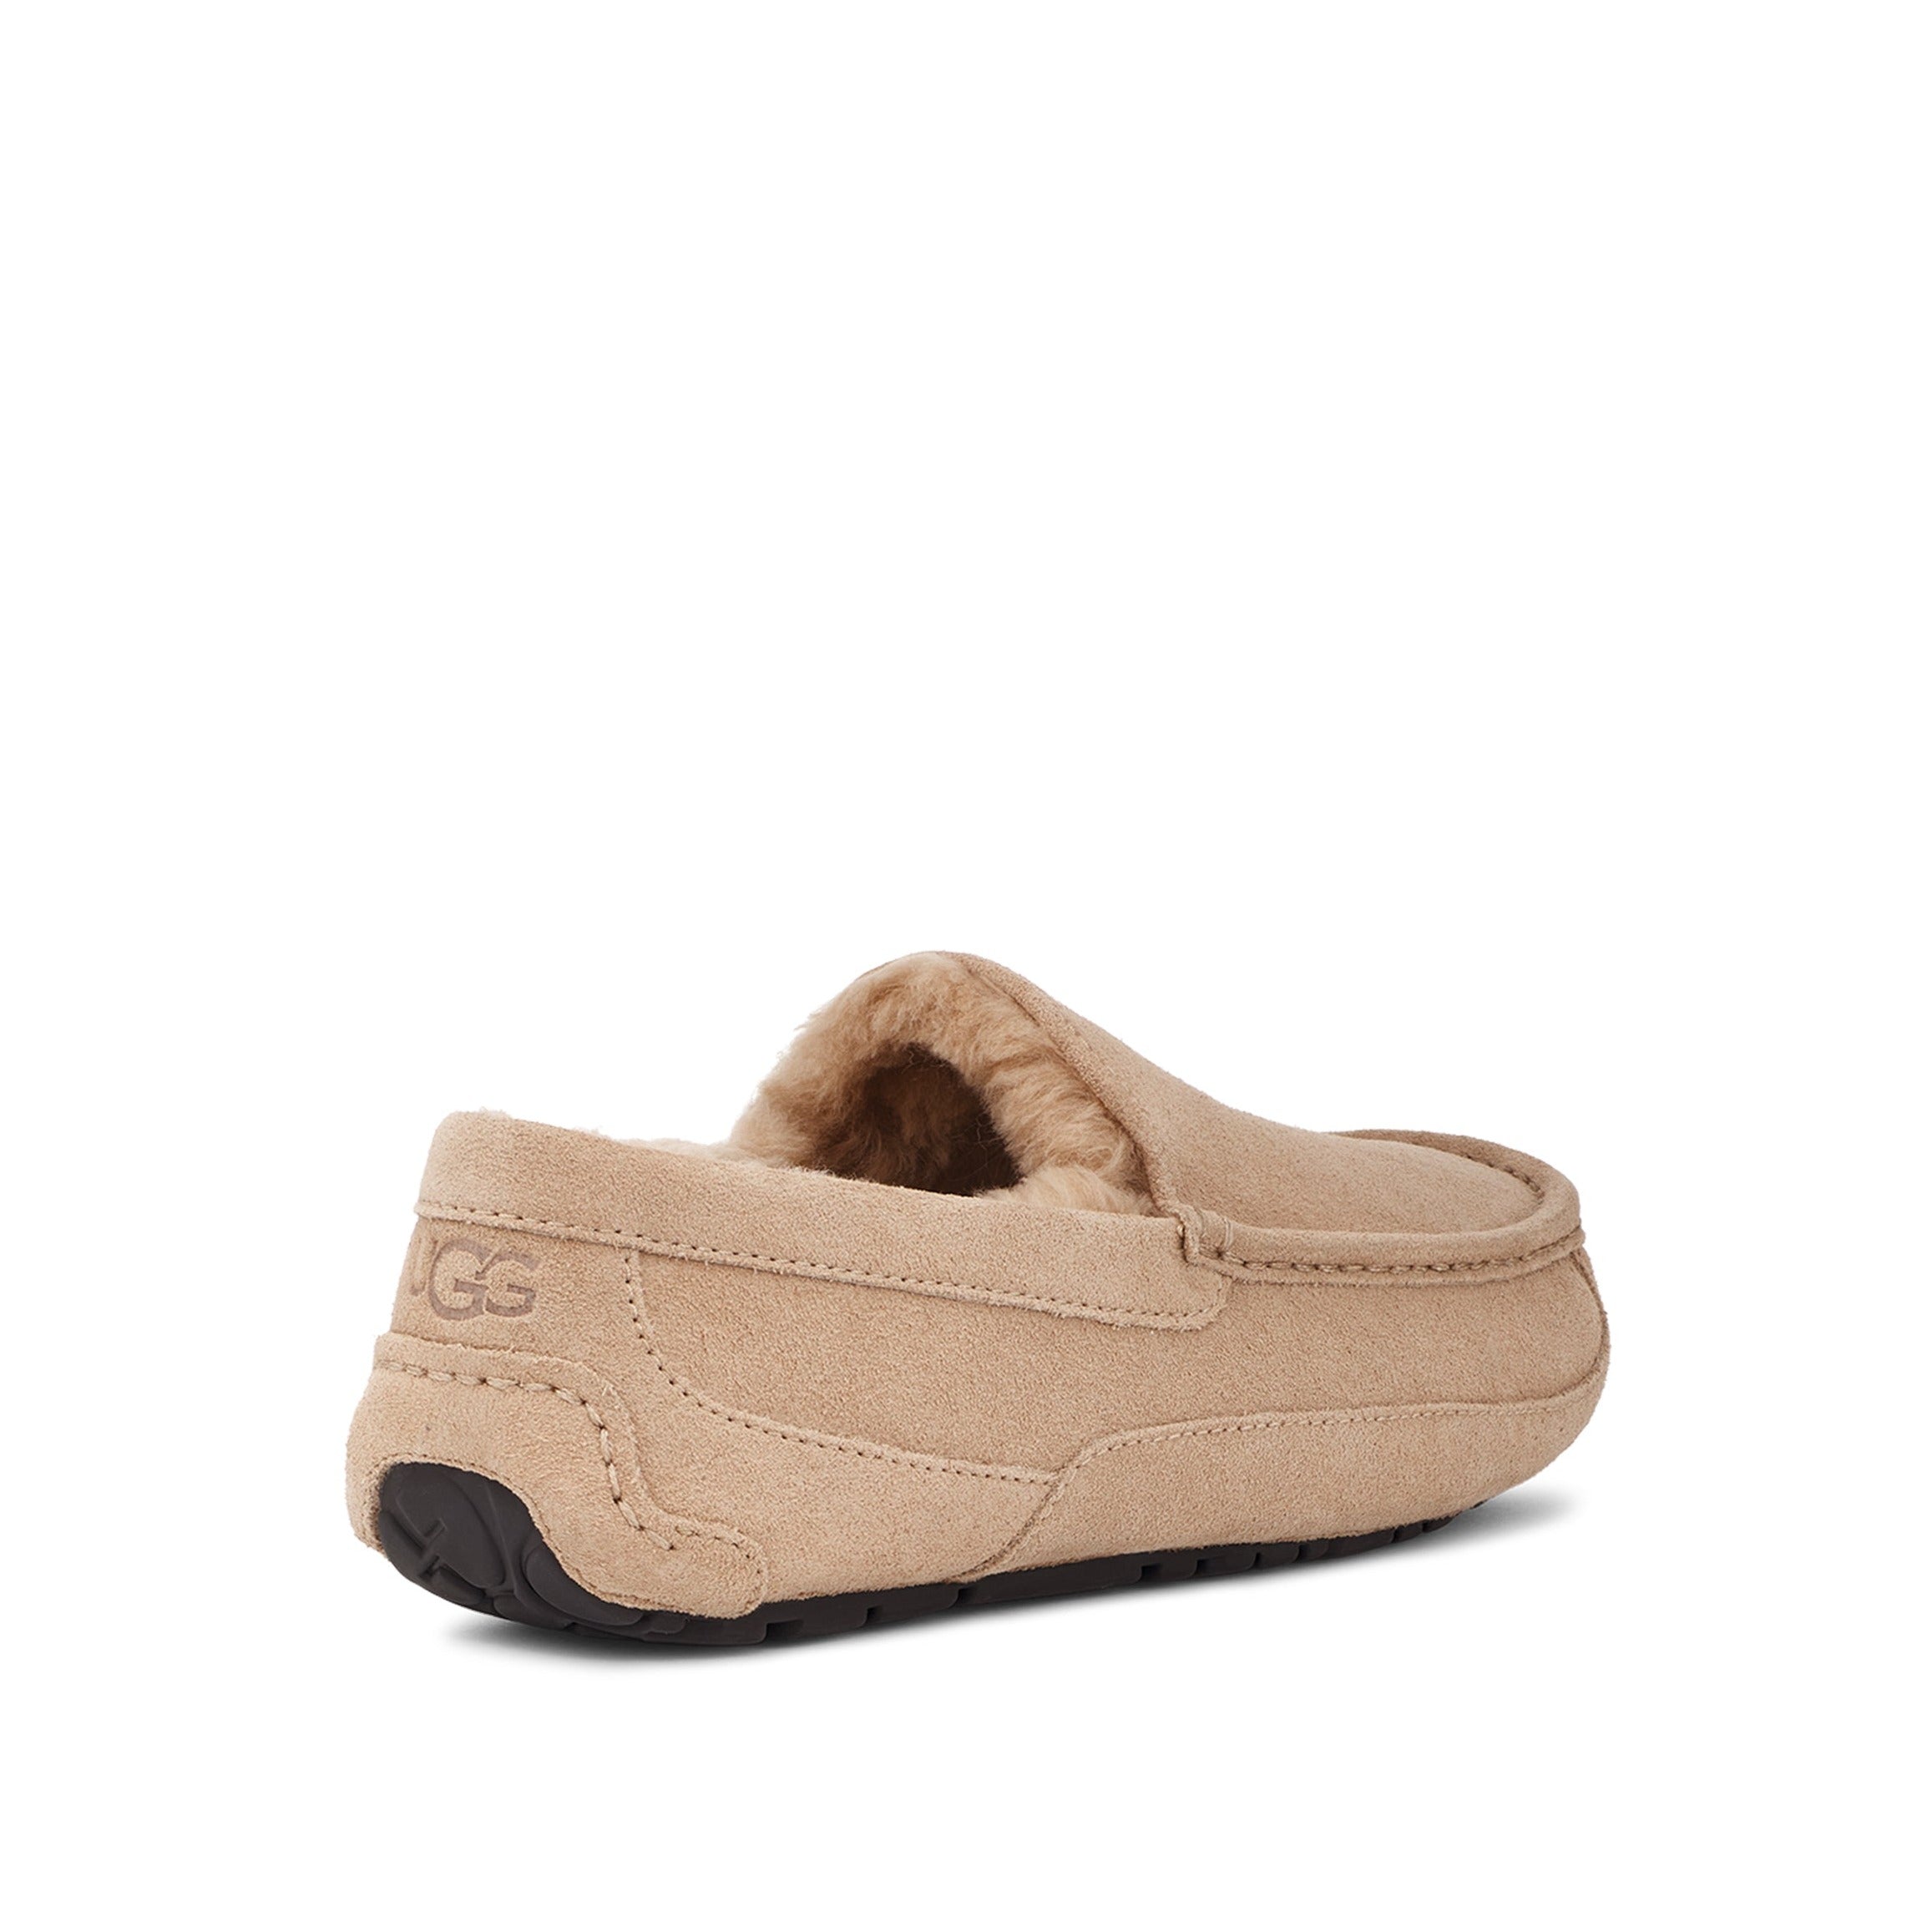 Sample UGG Ascot Loafers &amp; Laceups   